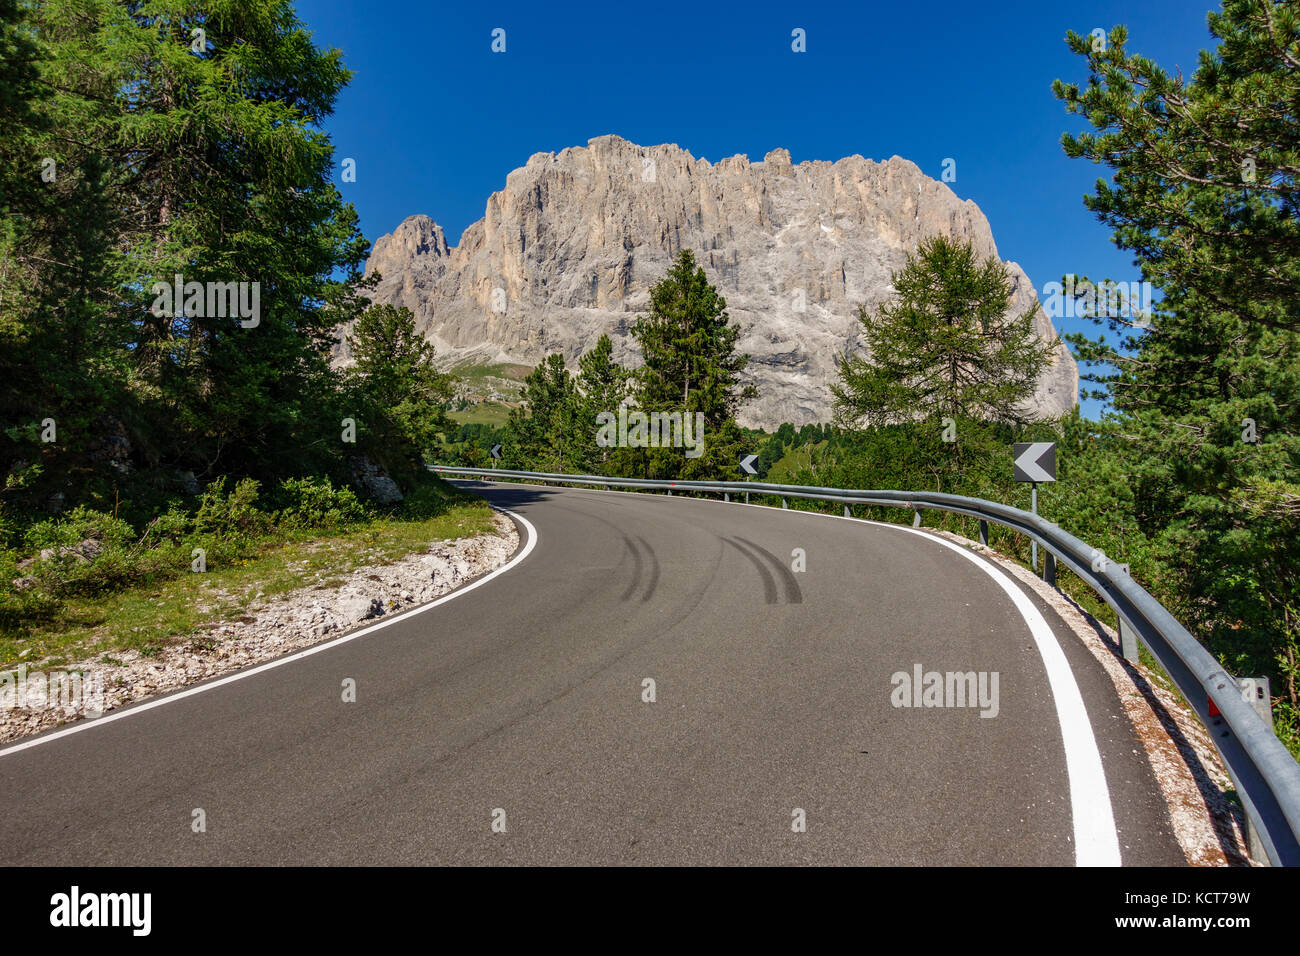 Picturesque road and landmark in the Sella Pass, Dolomites Stock Photo